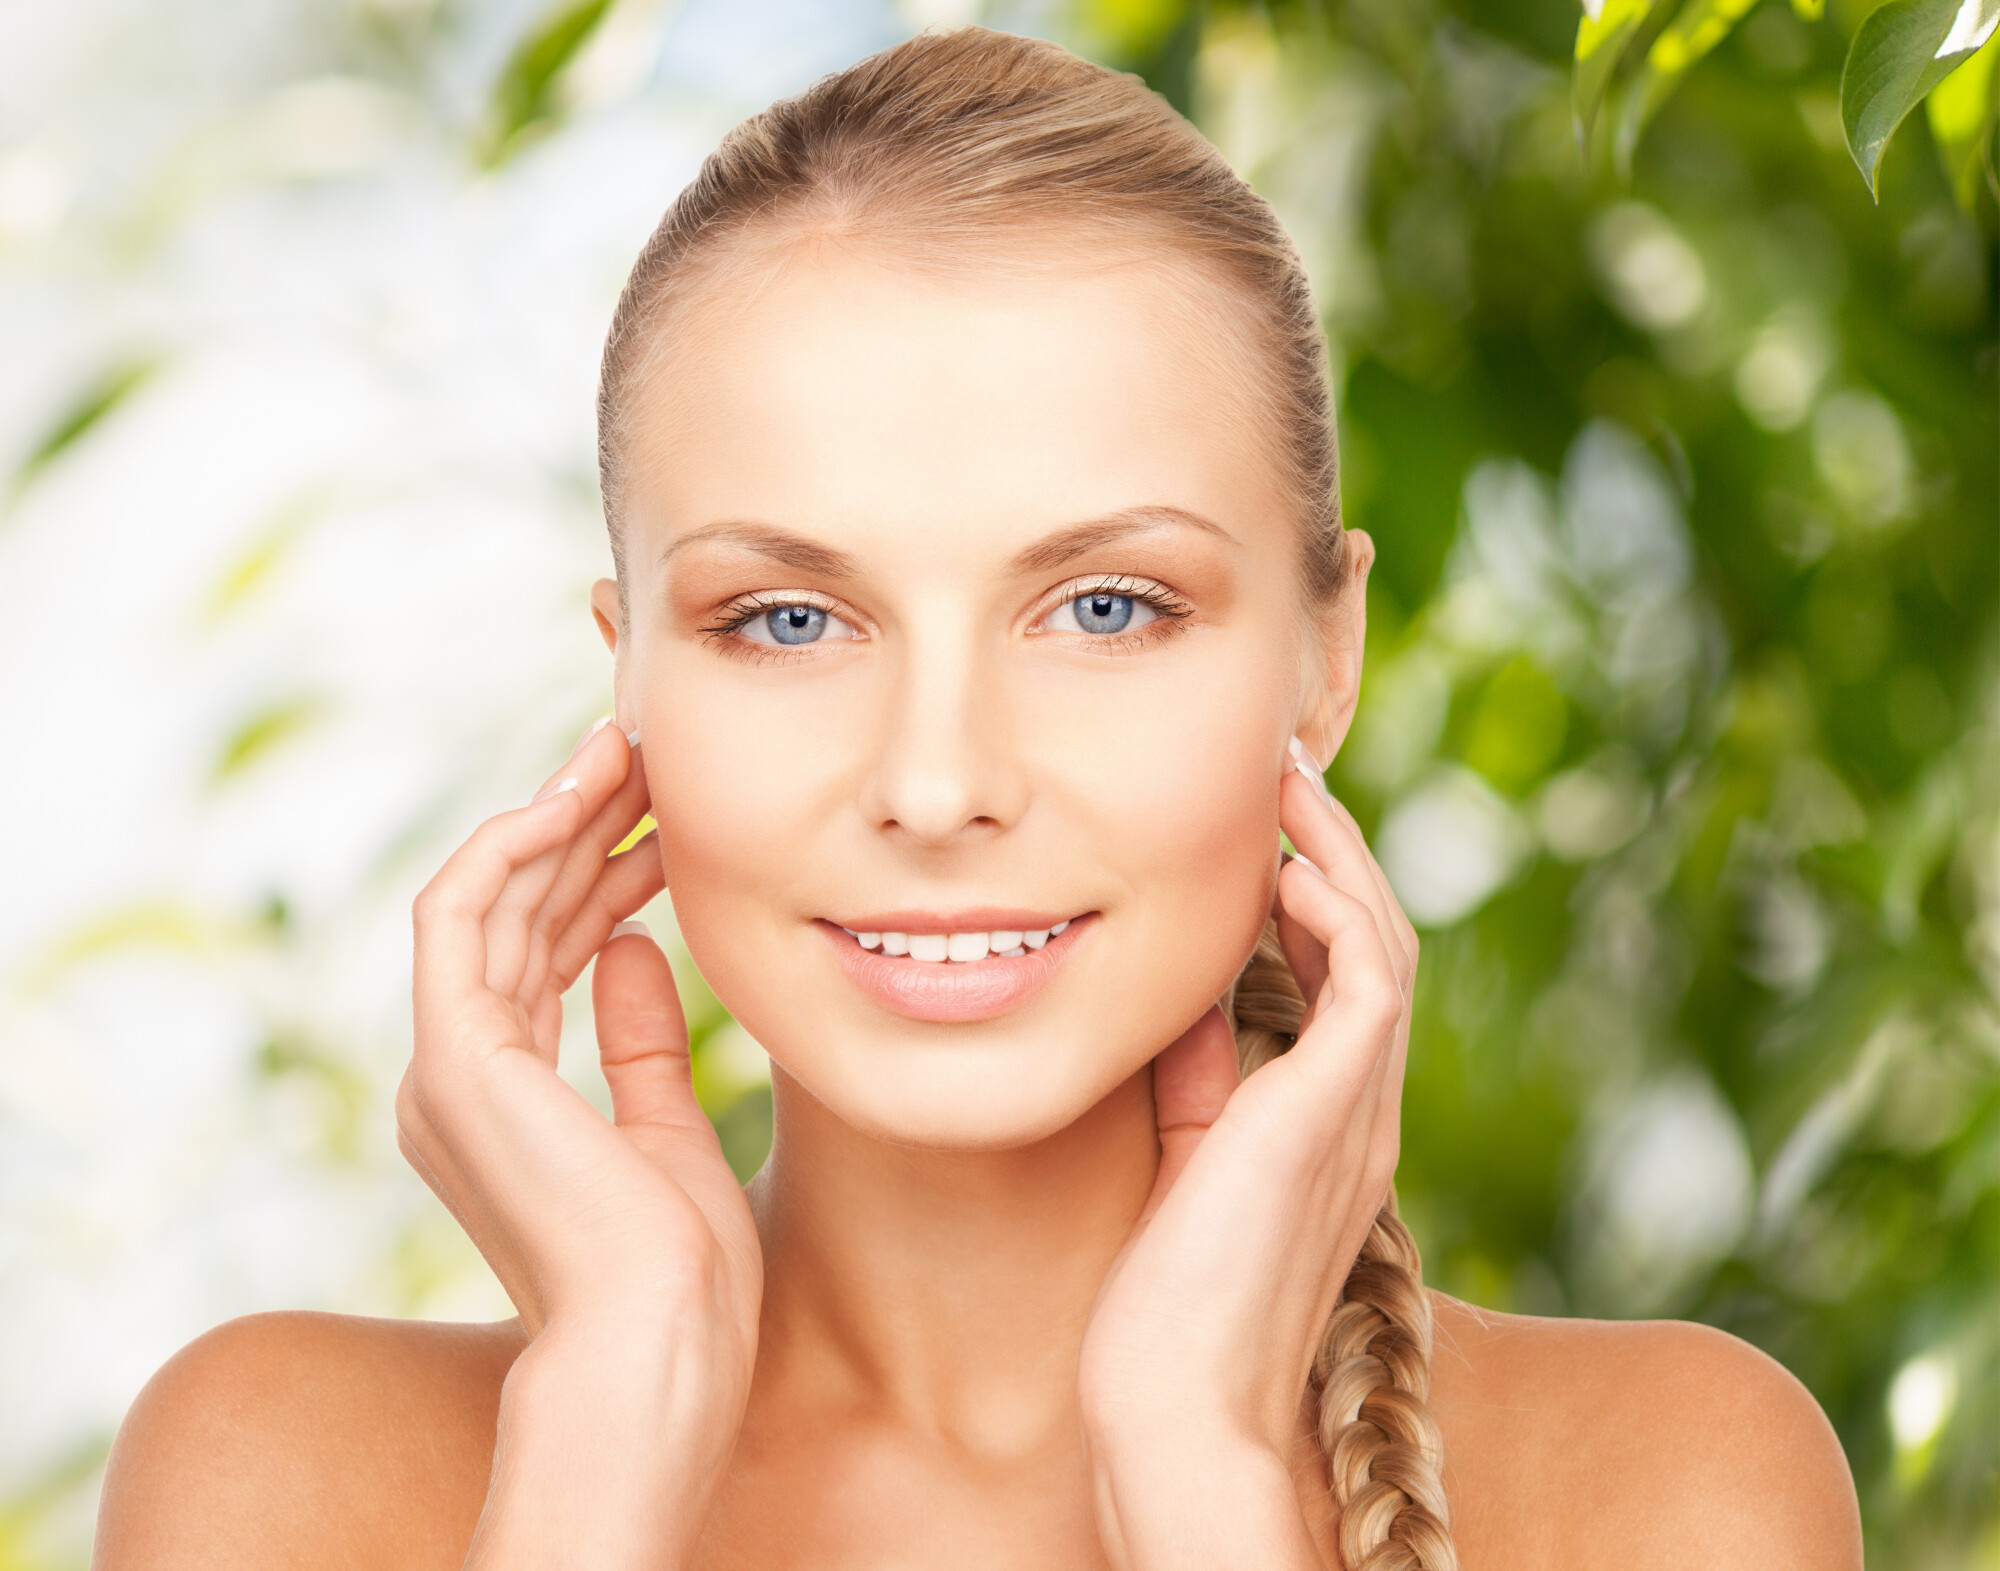 What Is Facial Balancing and What Does It Entail?